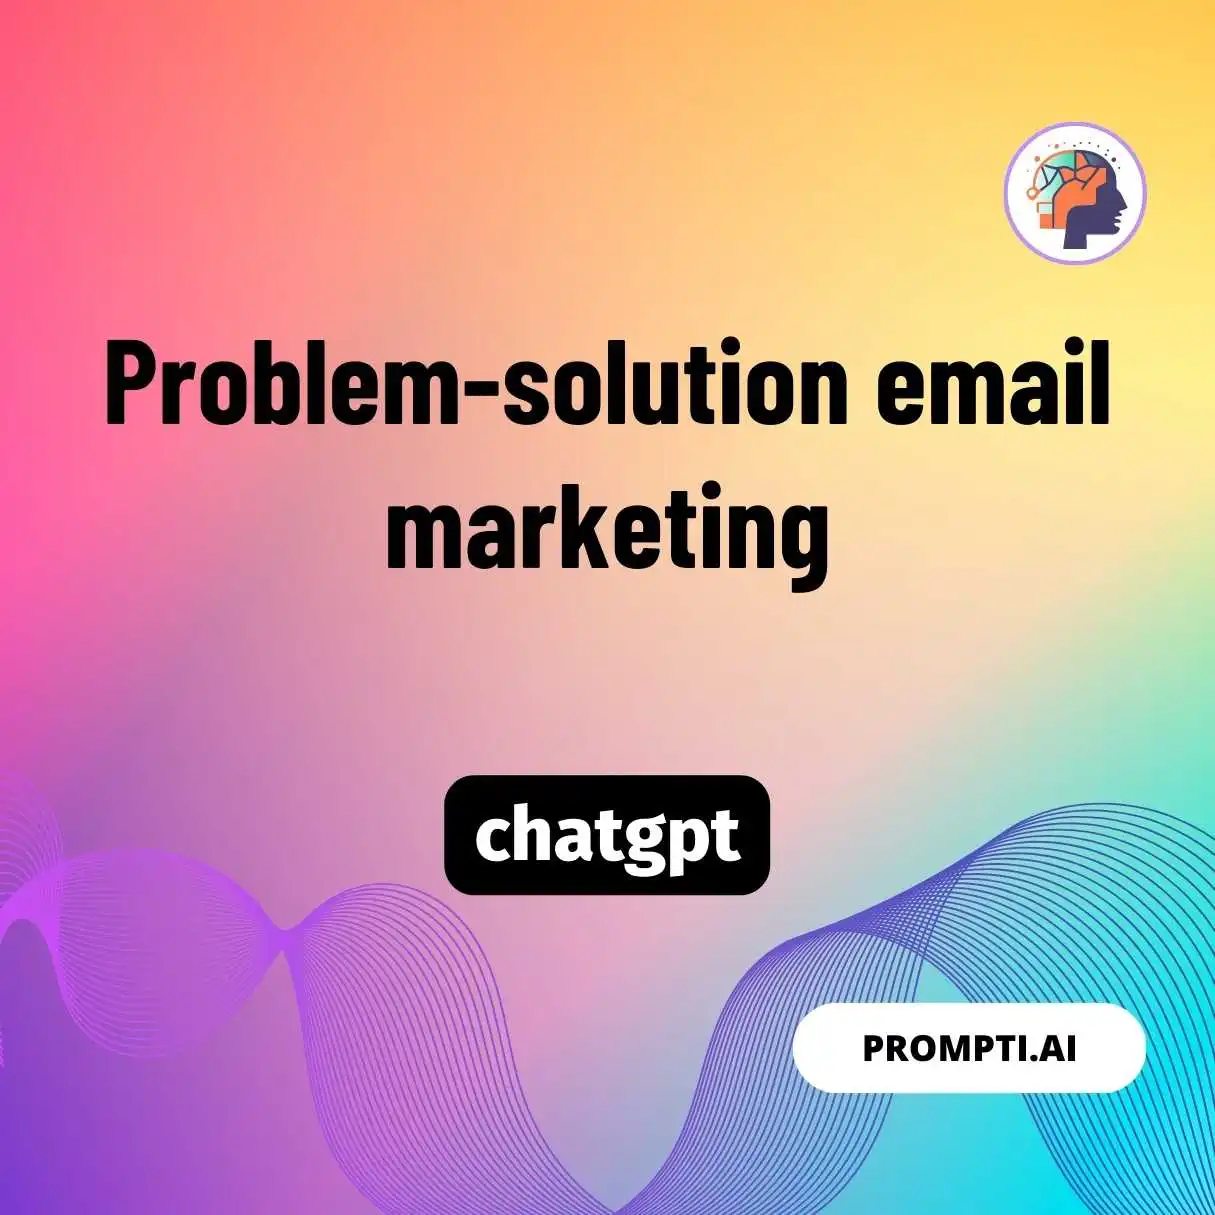 Problem-solution email marketing